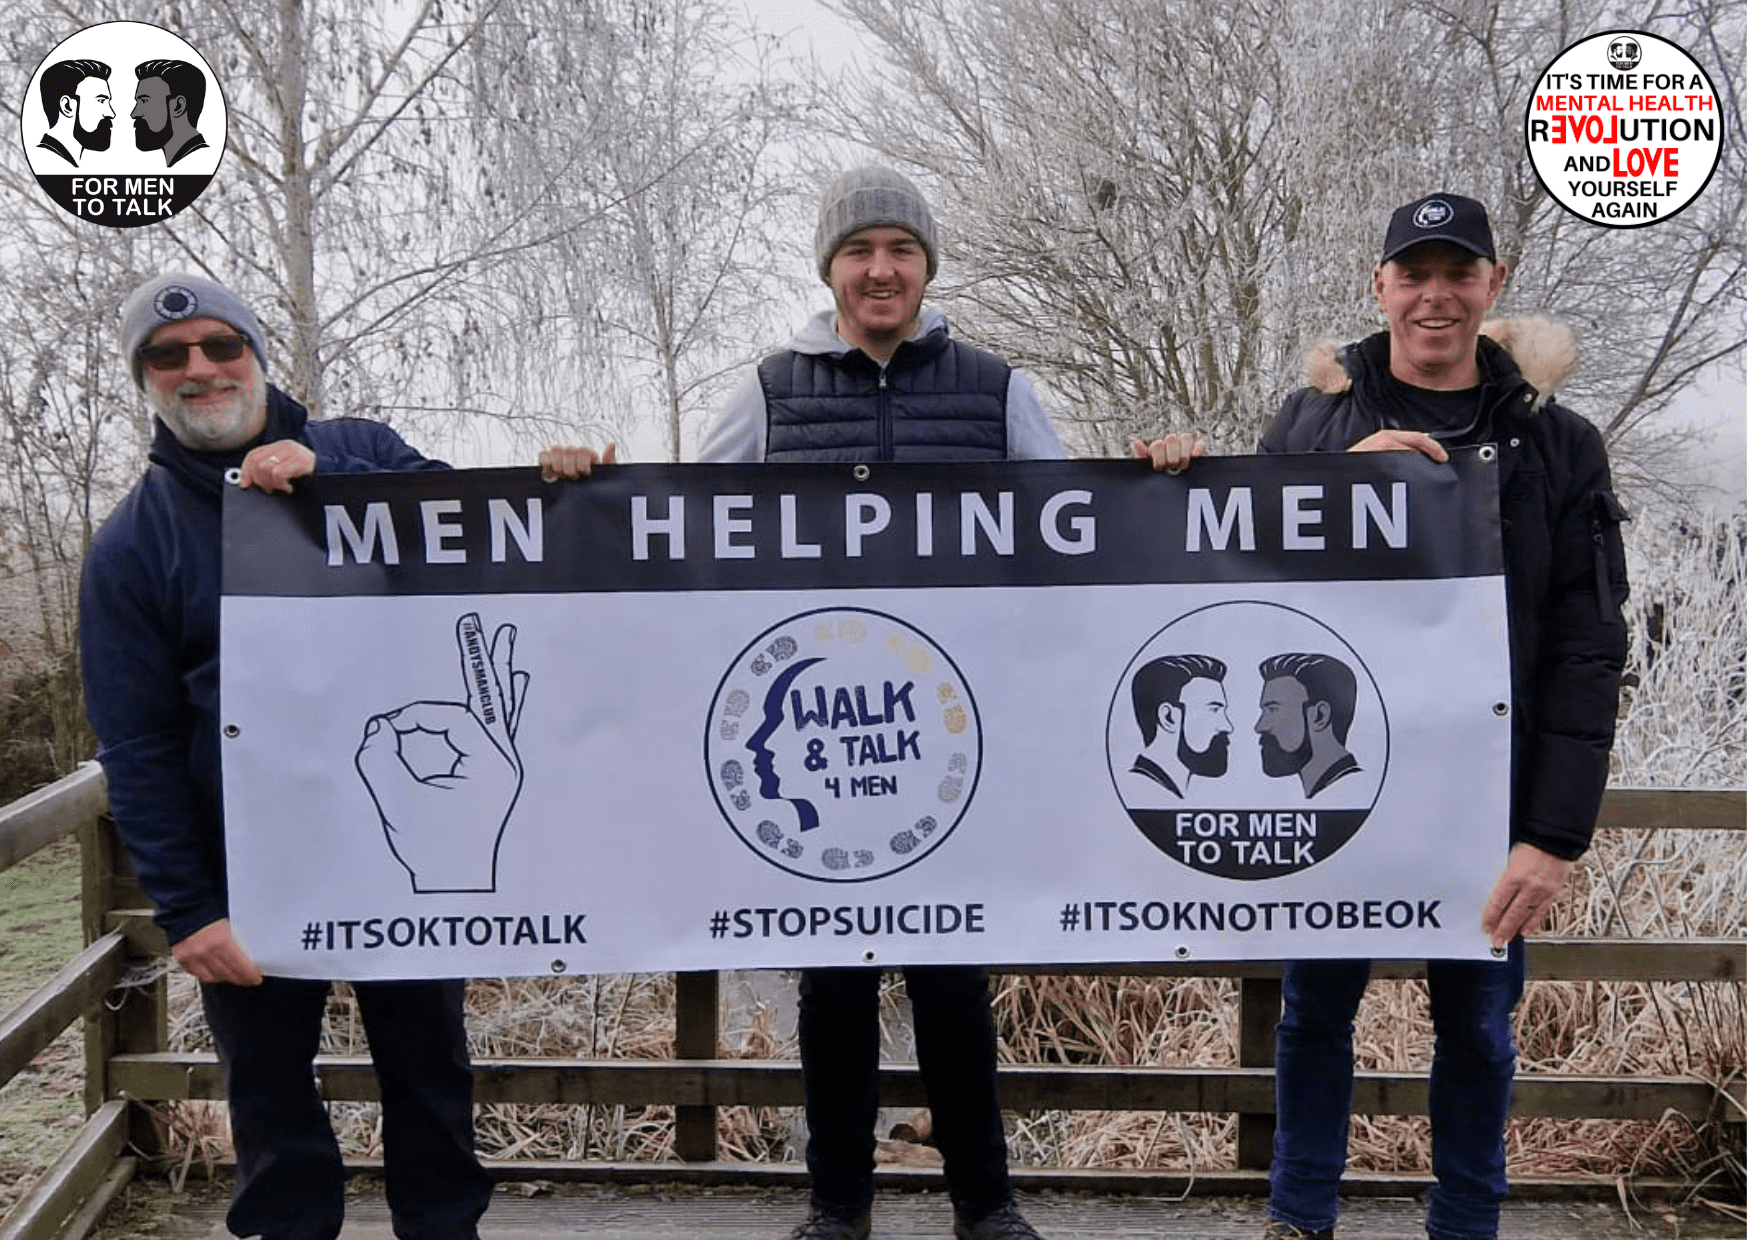 St Neots Town FC supports local mens mental health groups